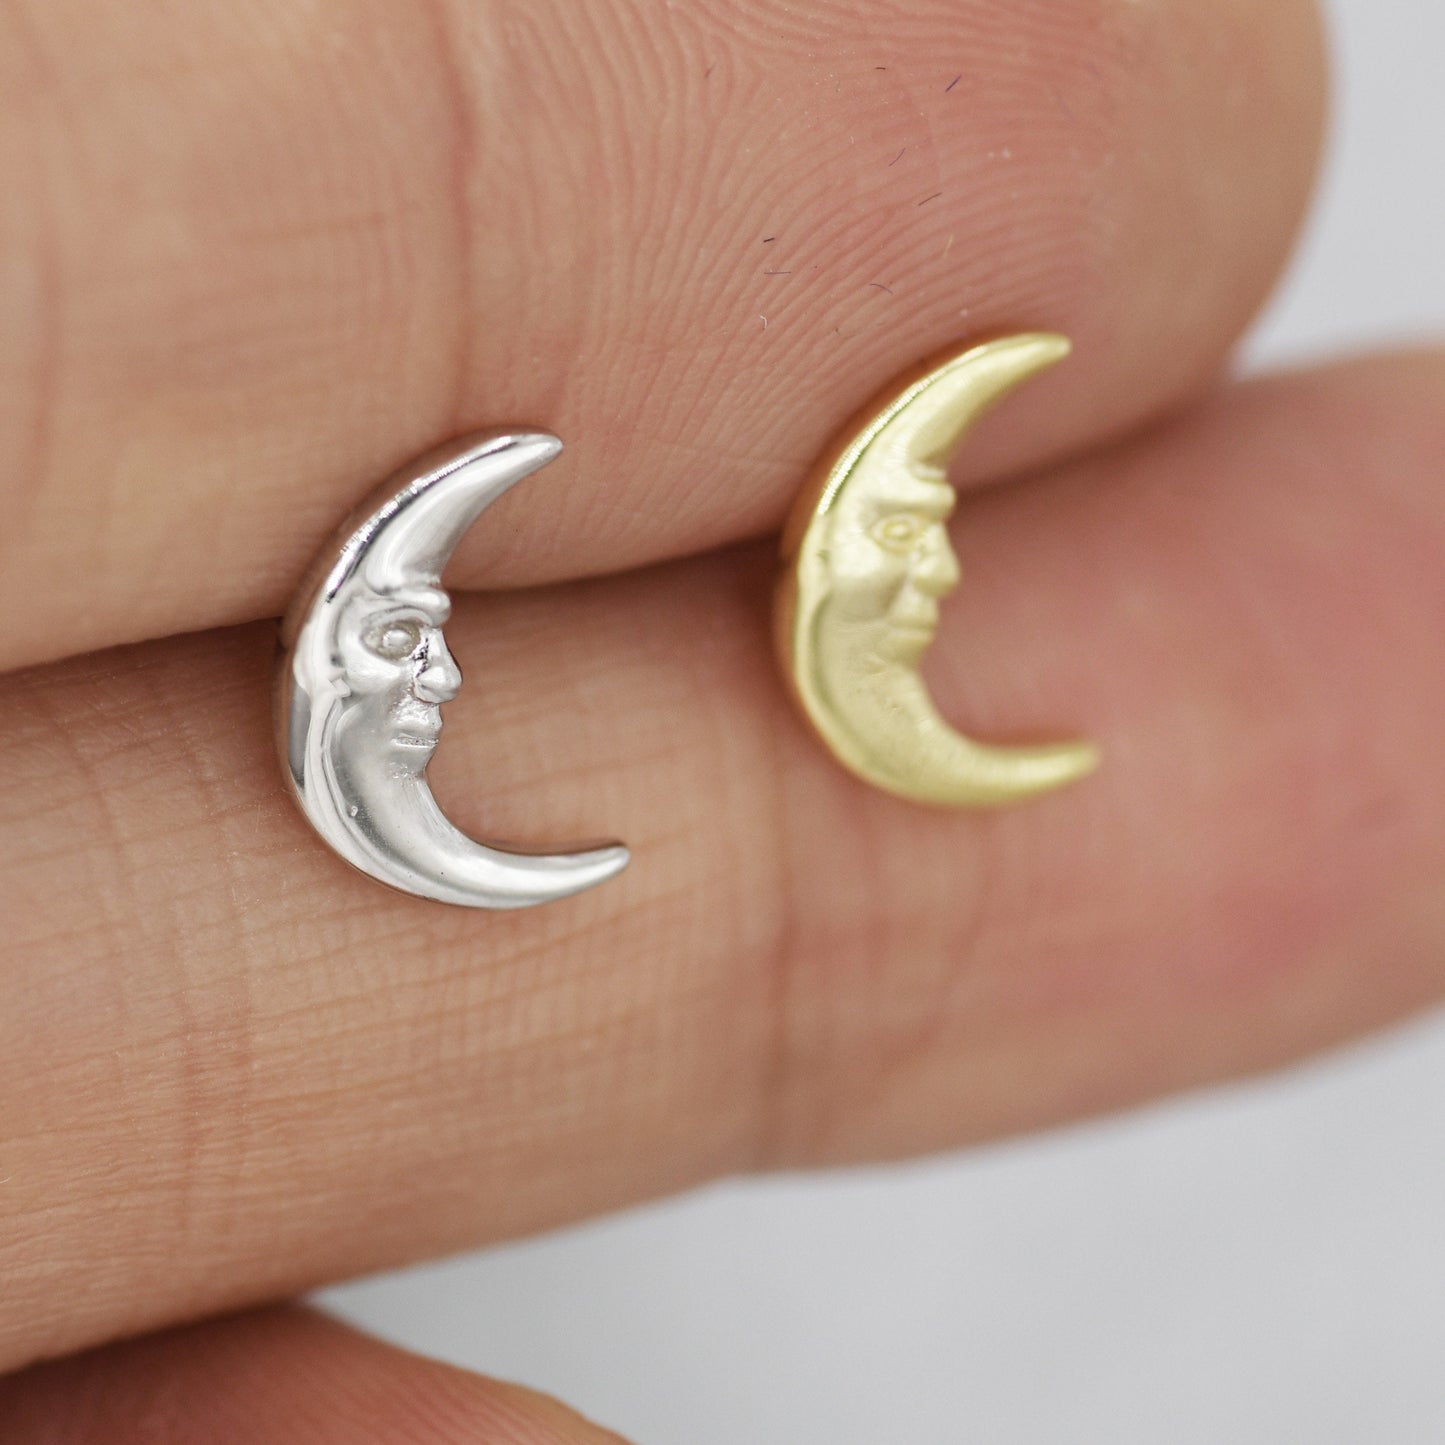 Man in the Moon Stud Earrings in Sterling Silver - Moon Face Earrings - Gold or Silver - Cute, Fun, Whimsical and Pretty Jewellery